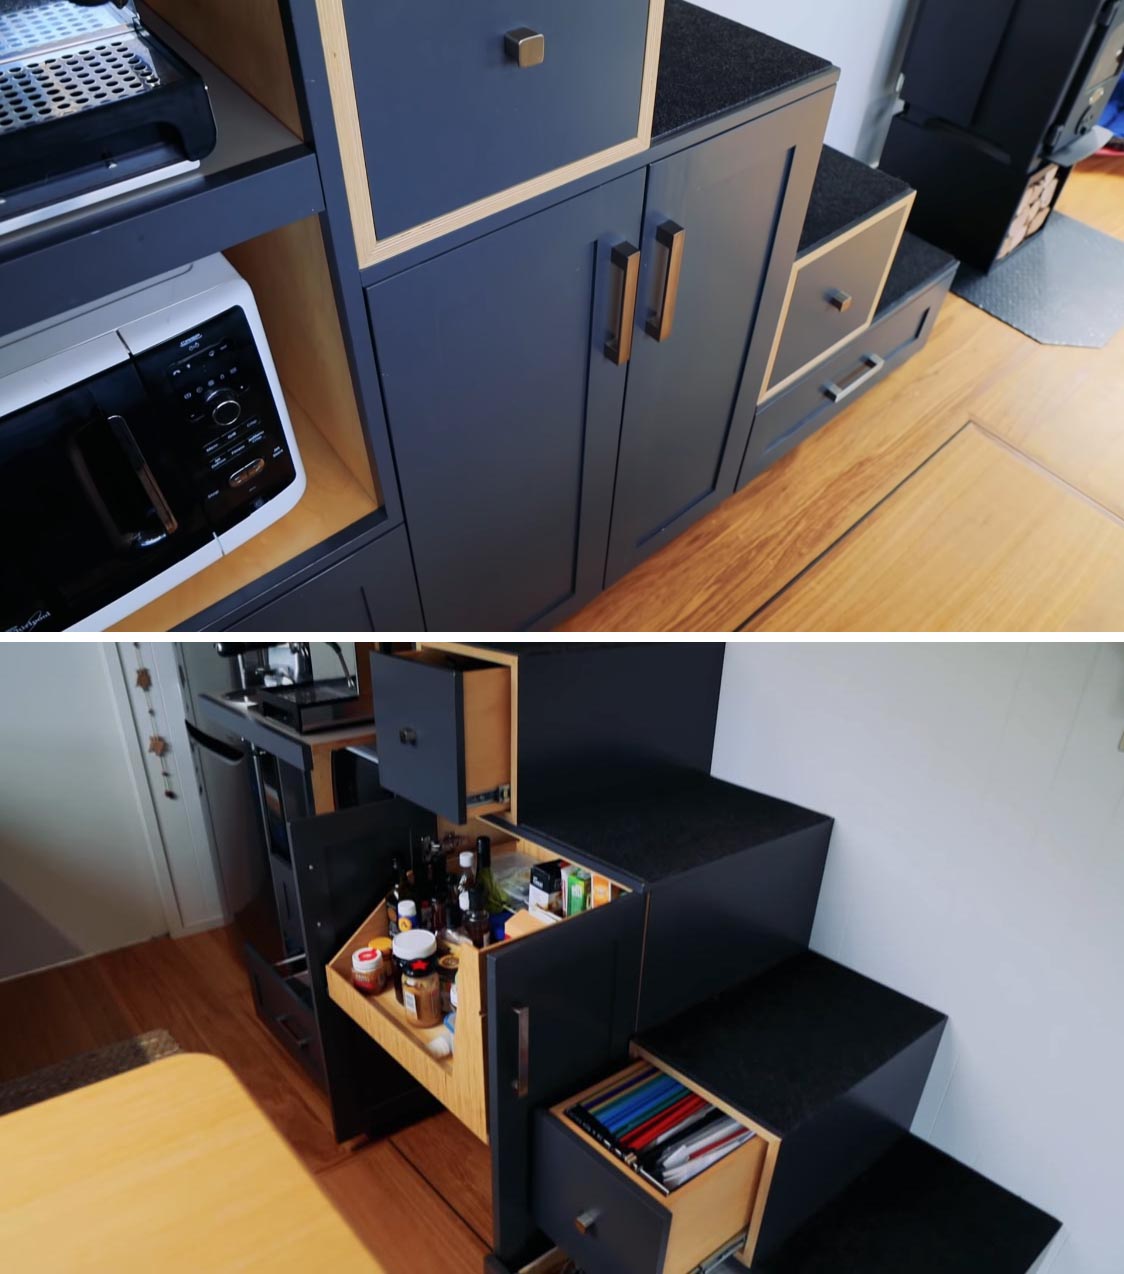 The under stair storage cabinets in this modern tiny home include space for a pantry with pull-out drawers, a filing cabinet, and a coffee station.